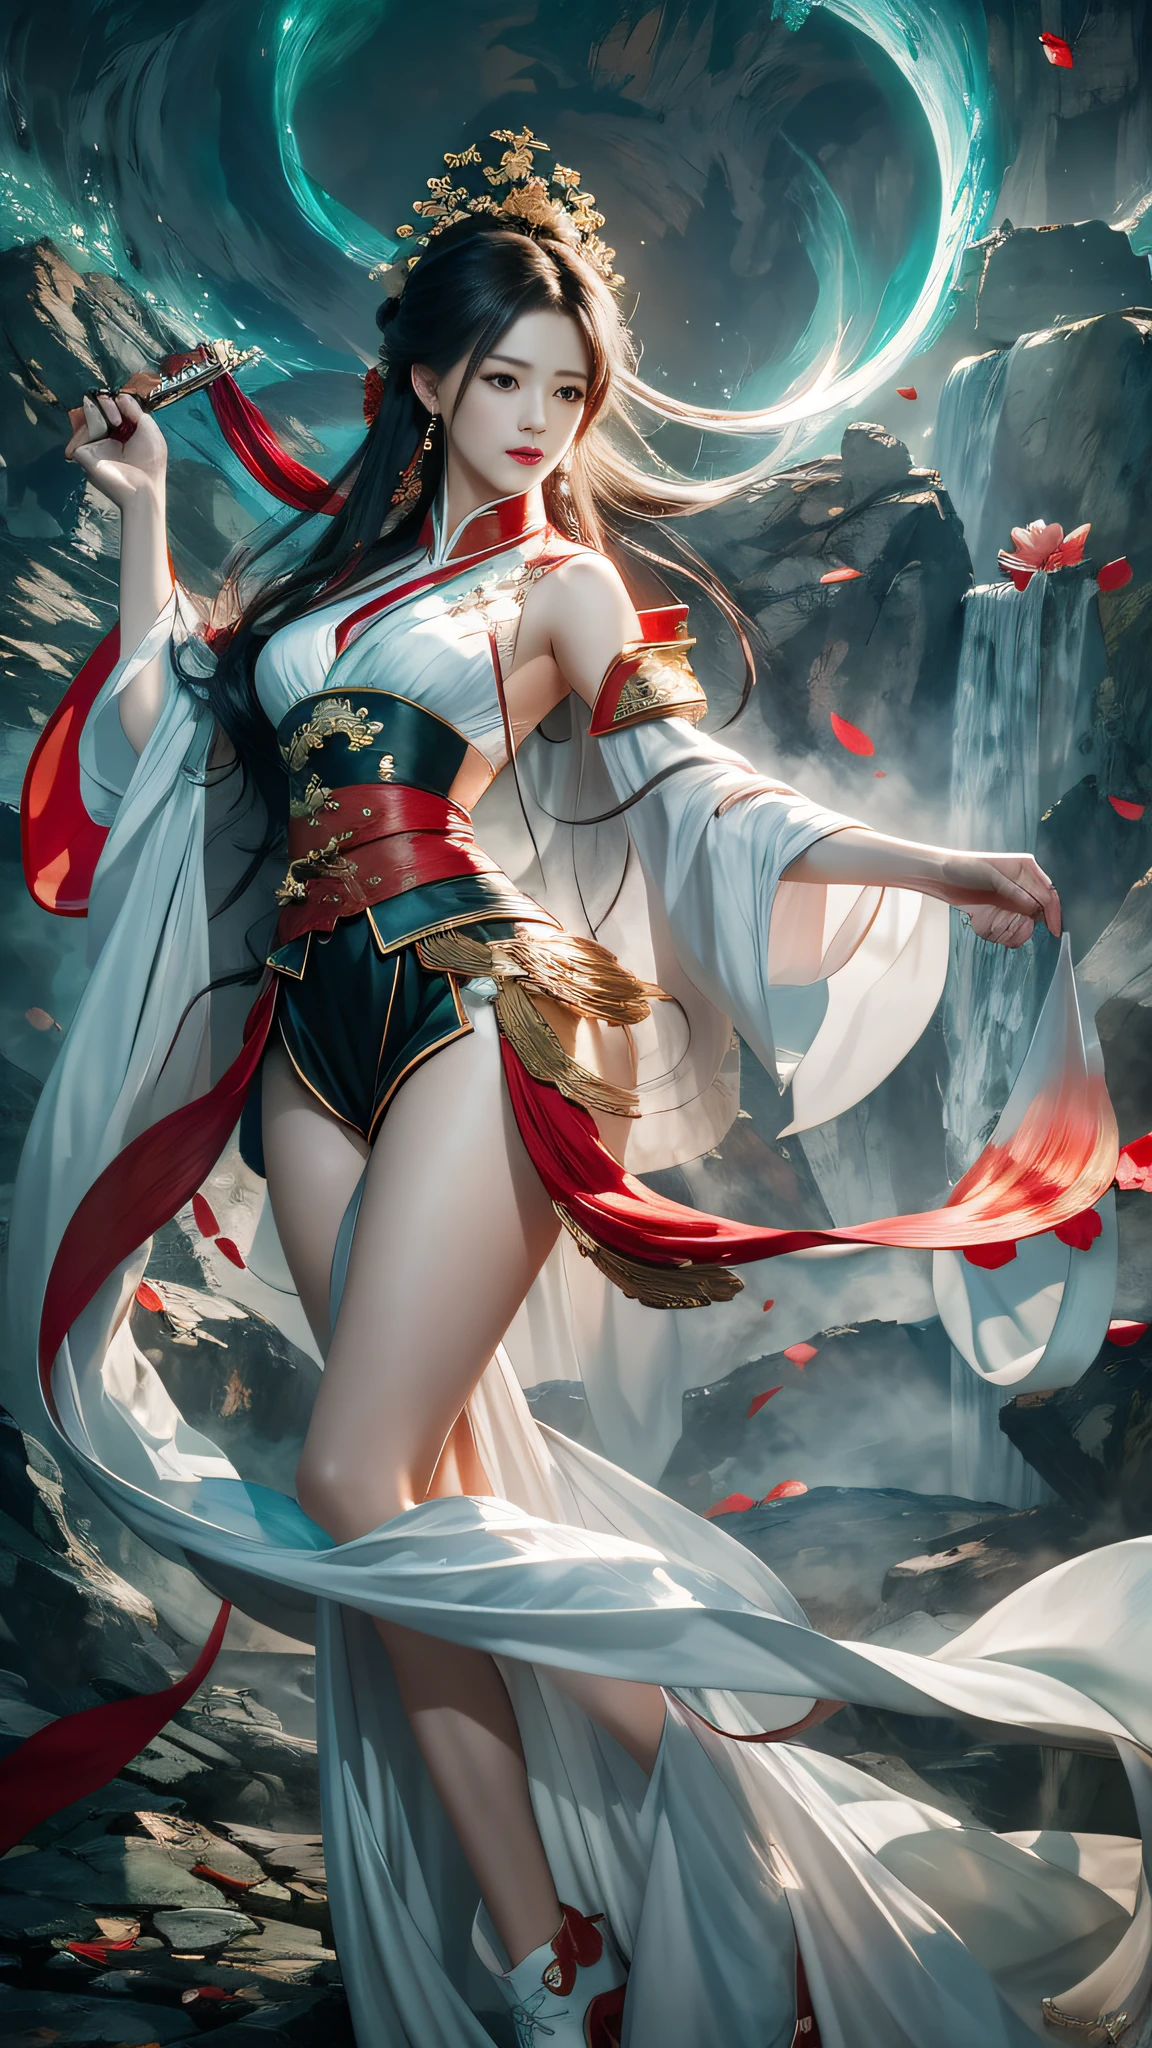 A woman in a white dress and red cloak poses for a photo, by Yang J, artgerm and ruan jia, ig model | art germ, Ruan Jia and Artgerm, Extremely detailed Artgerm, full-body xianxia, art-style, author：ruanjia、stanely artgerm, artgerm style，Works of masters，Best image quality，Higher quality，high detal，Ultra-high resolution，8K resolution